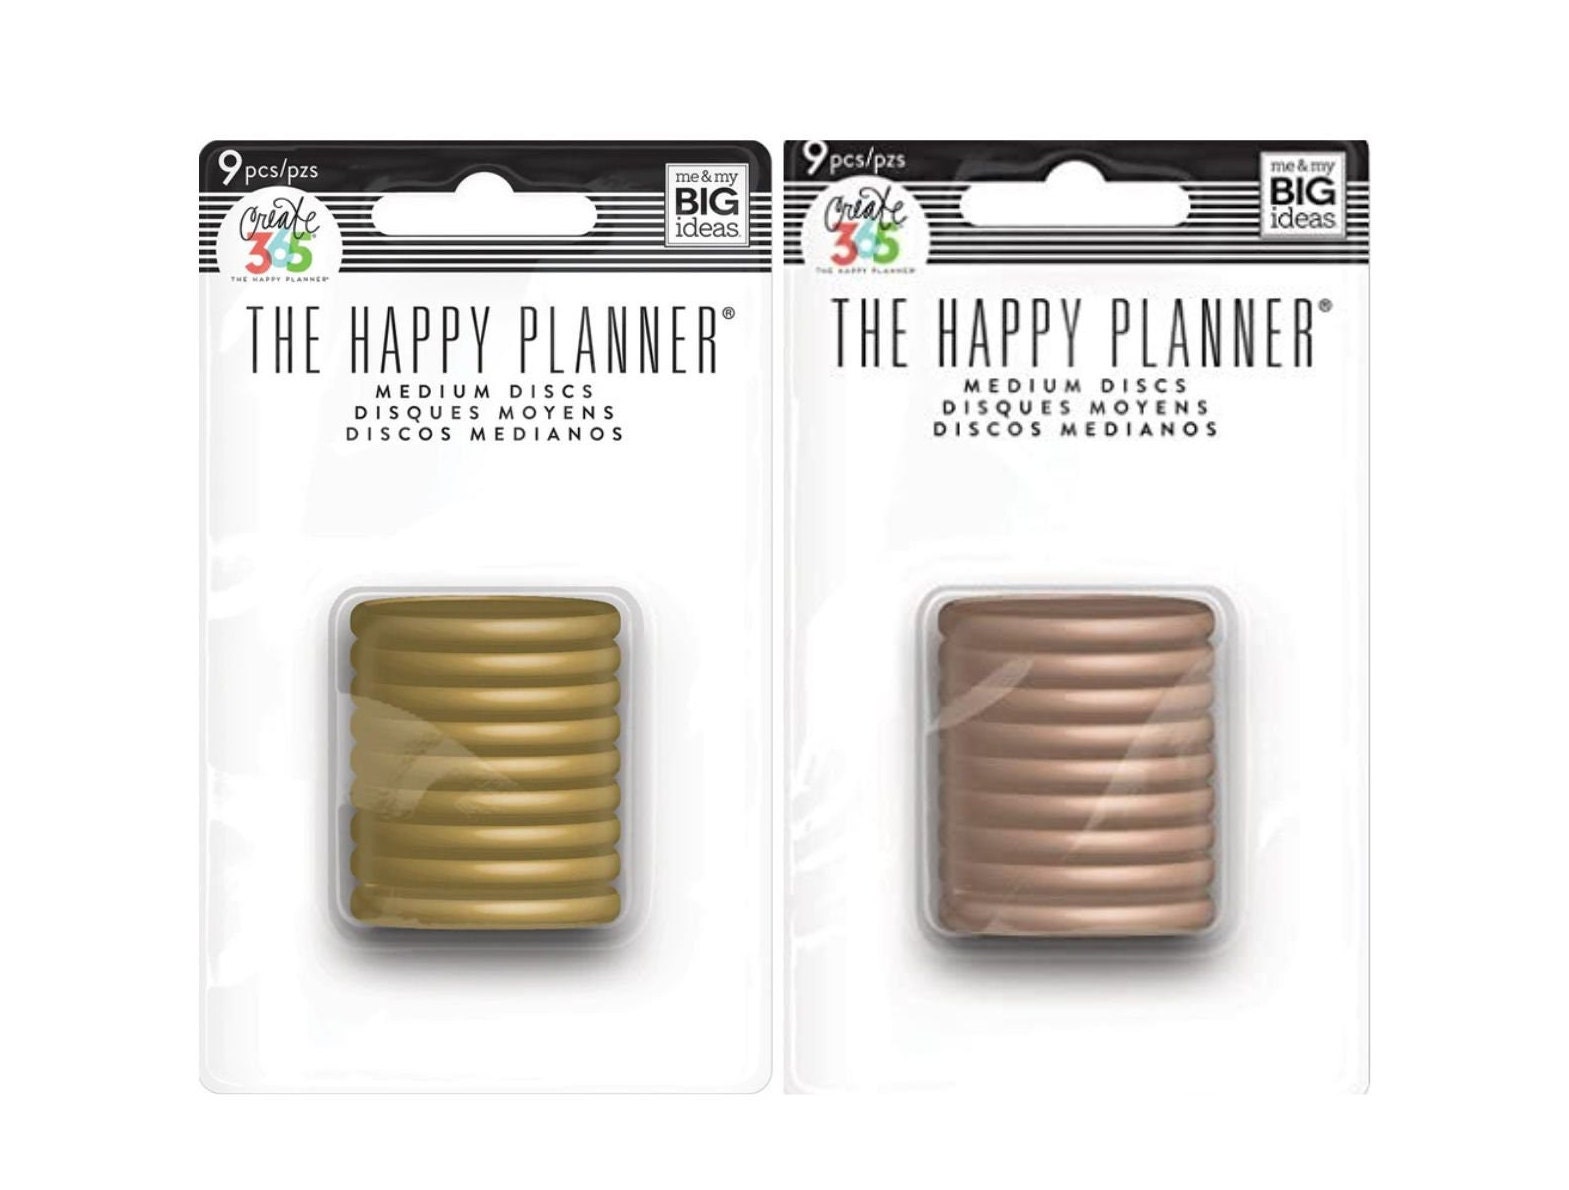 Me &my Big Ideas Create 365 the Happy Planner 9 Gold Binder Rings 1.5 Inch